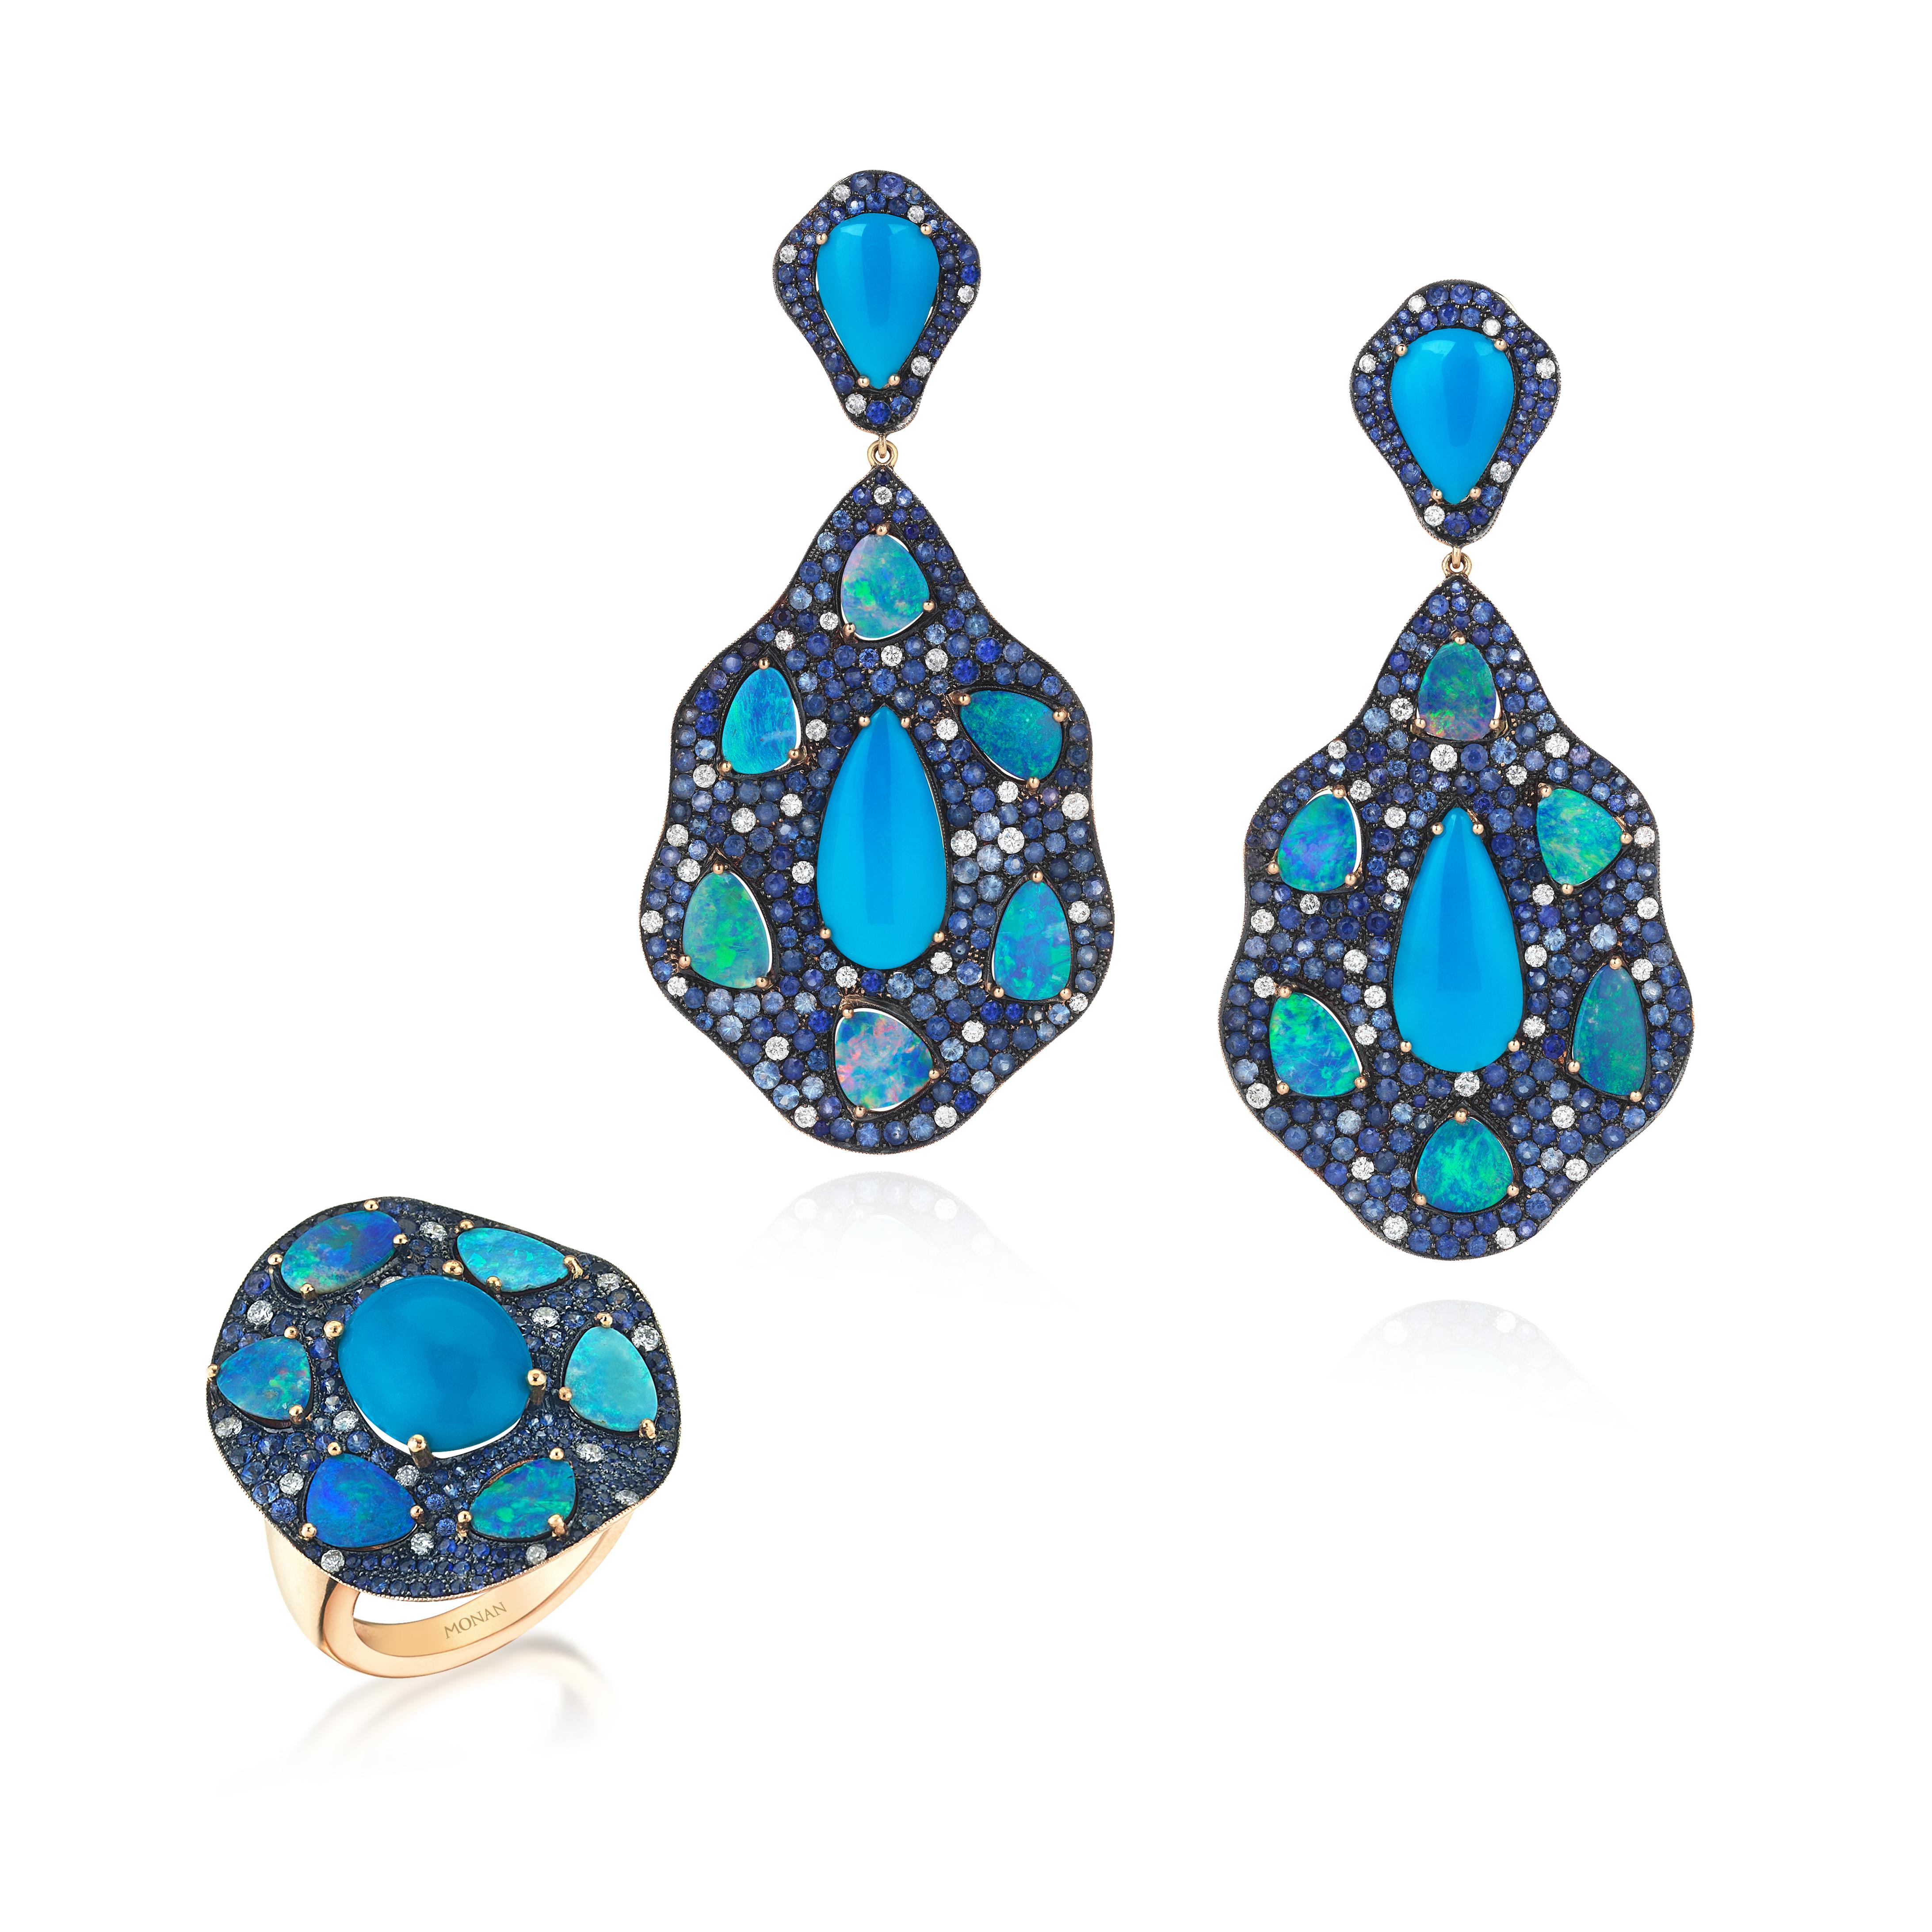 18 Karat yellow gold 'Blue Ocean Earrings' from Ode to Colours Collection created by Monan set with 12.48 carats of a turquoise, 8.86 carats of black opals, 1.14 carats of brilliant cut diamonds and  blue sapphires with the total weight of 10,25